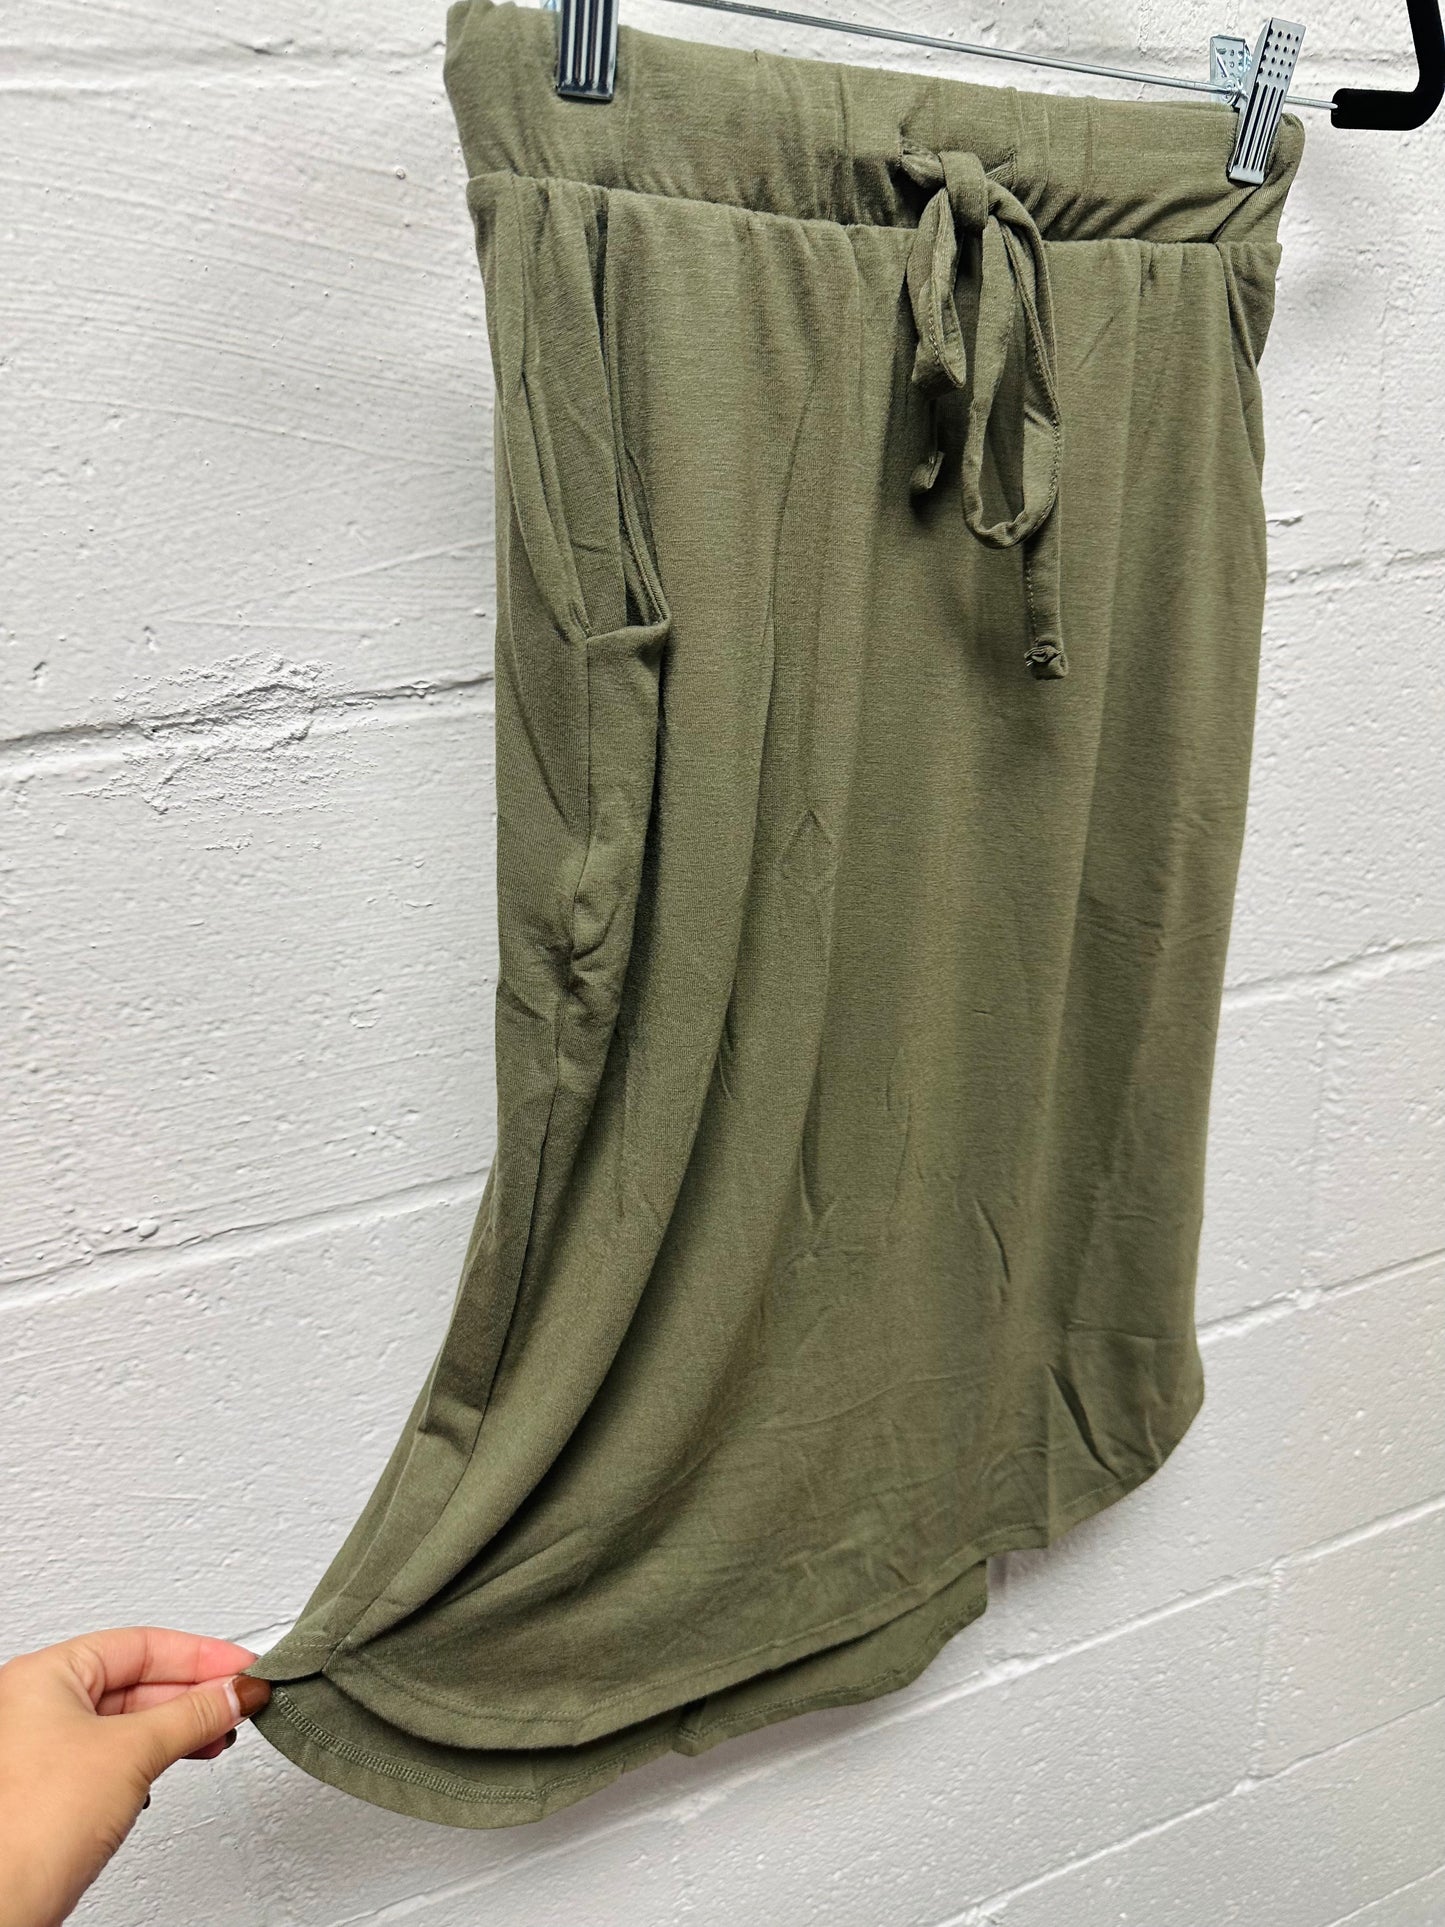 Olive Cotton Skirt With Pockets